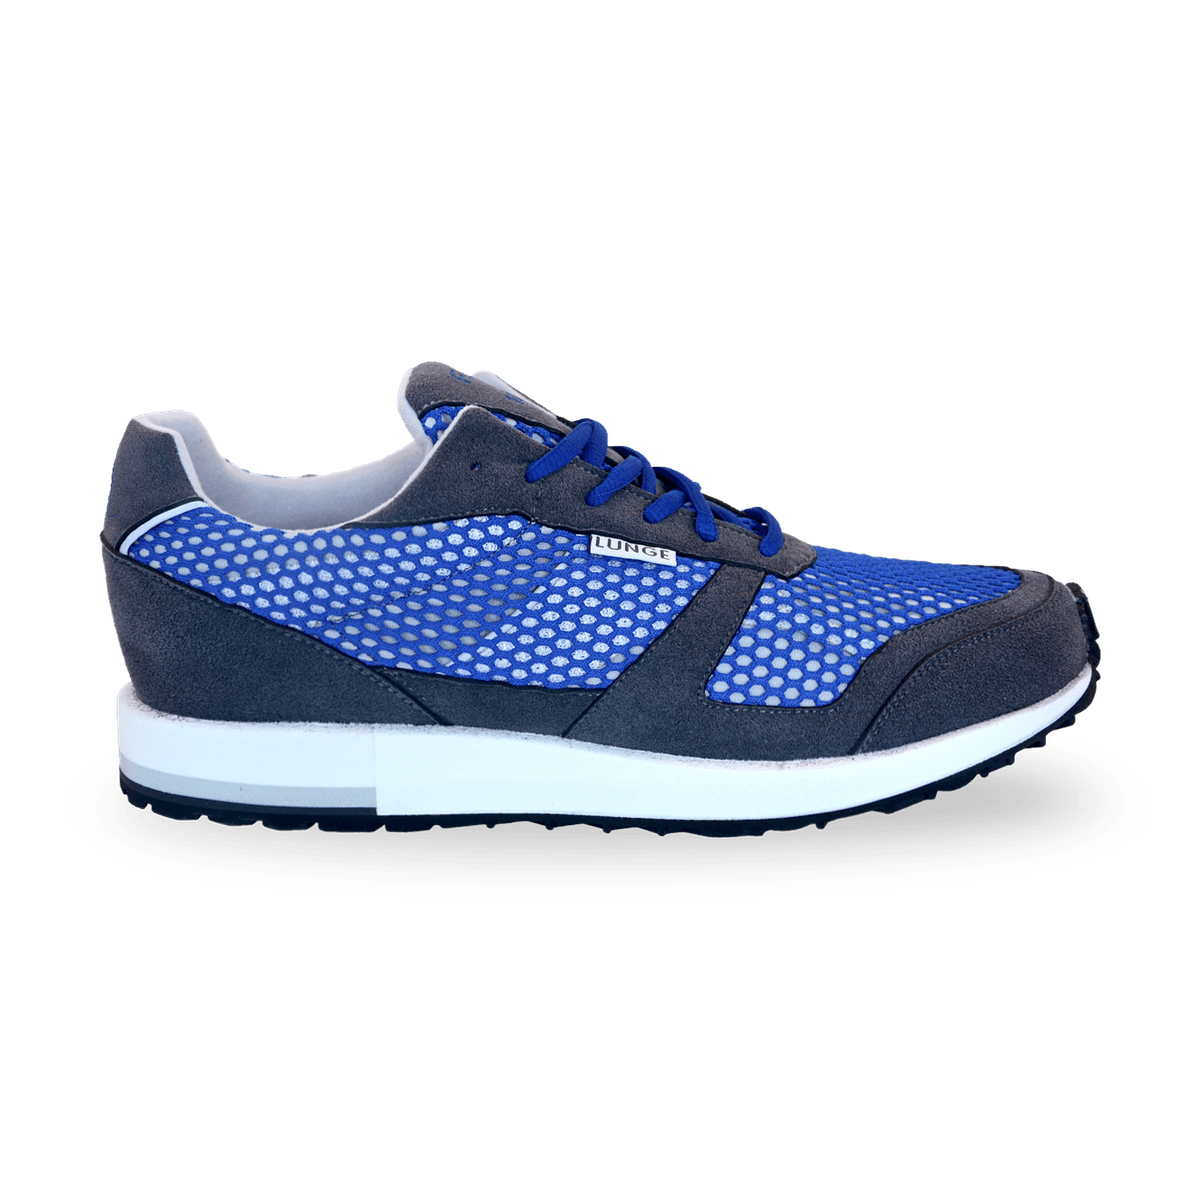 Classic Run Fis - running shoes for 